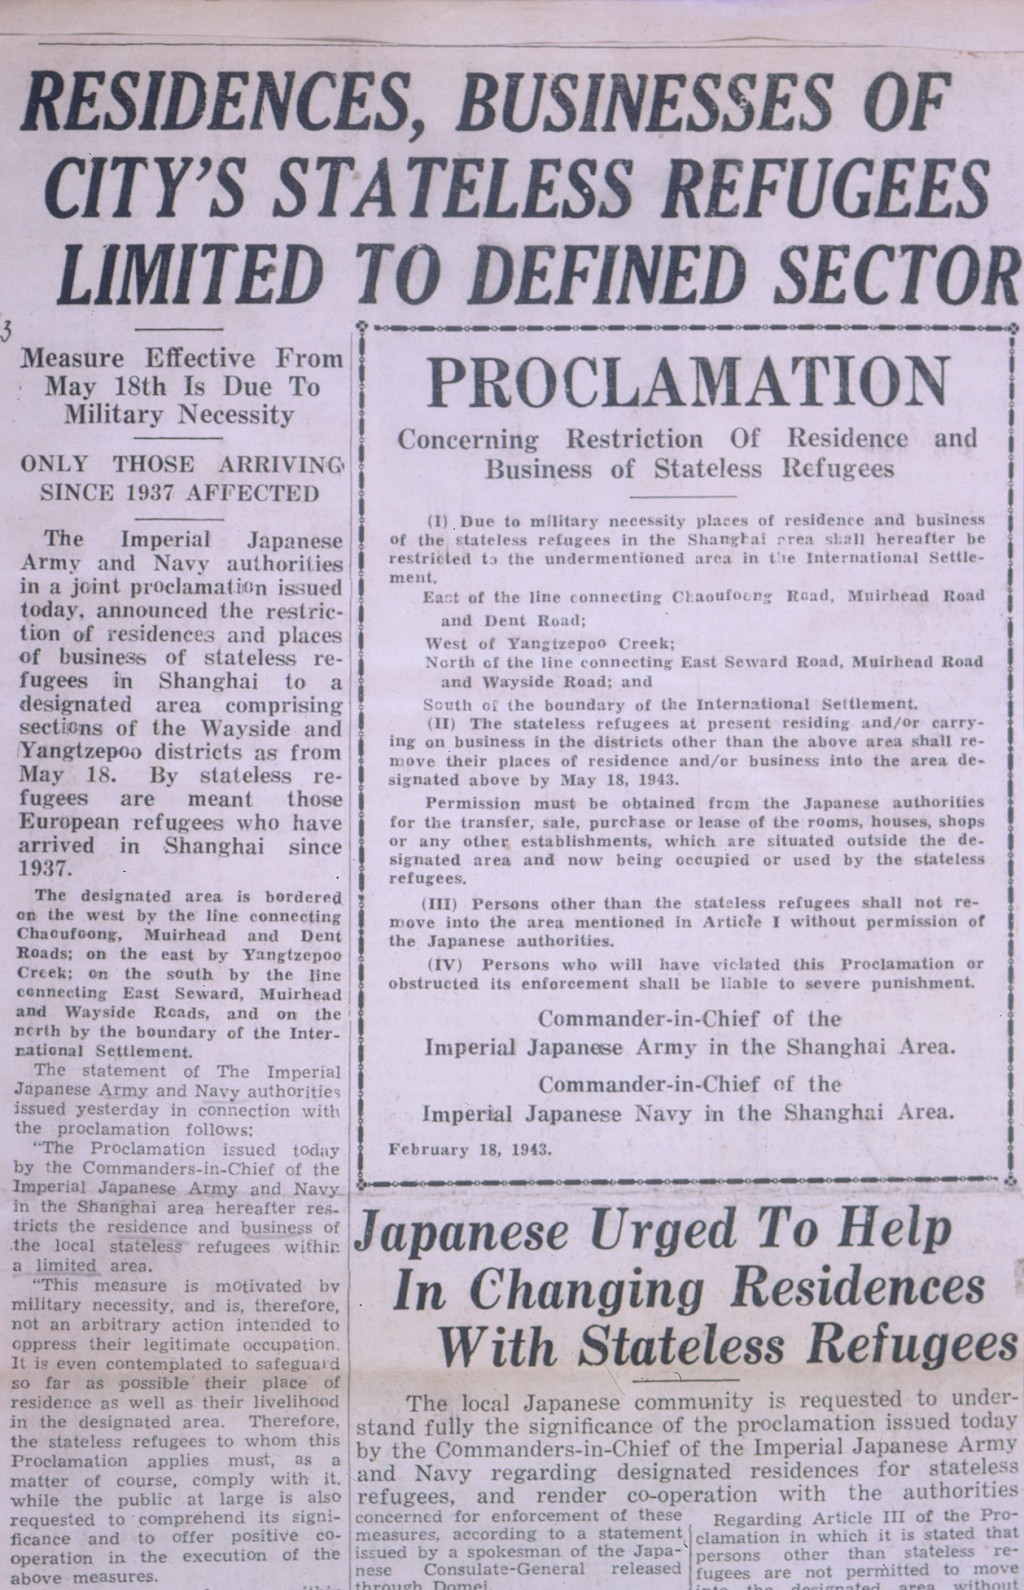 Proclamation of restricted zone in Shanghai for refugees [LCID: 20024xqj]